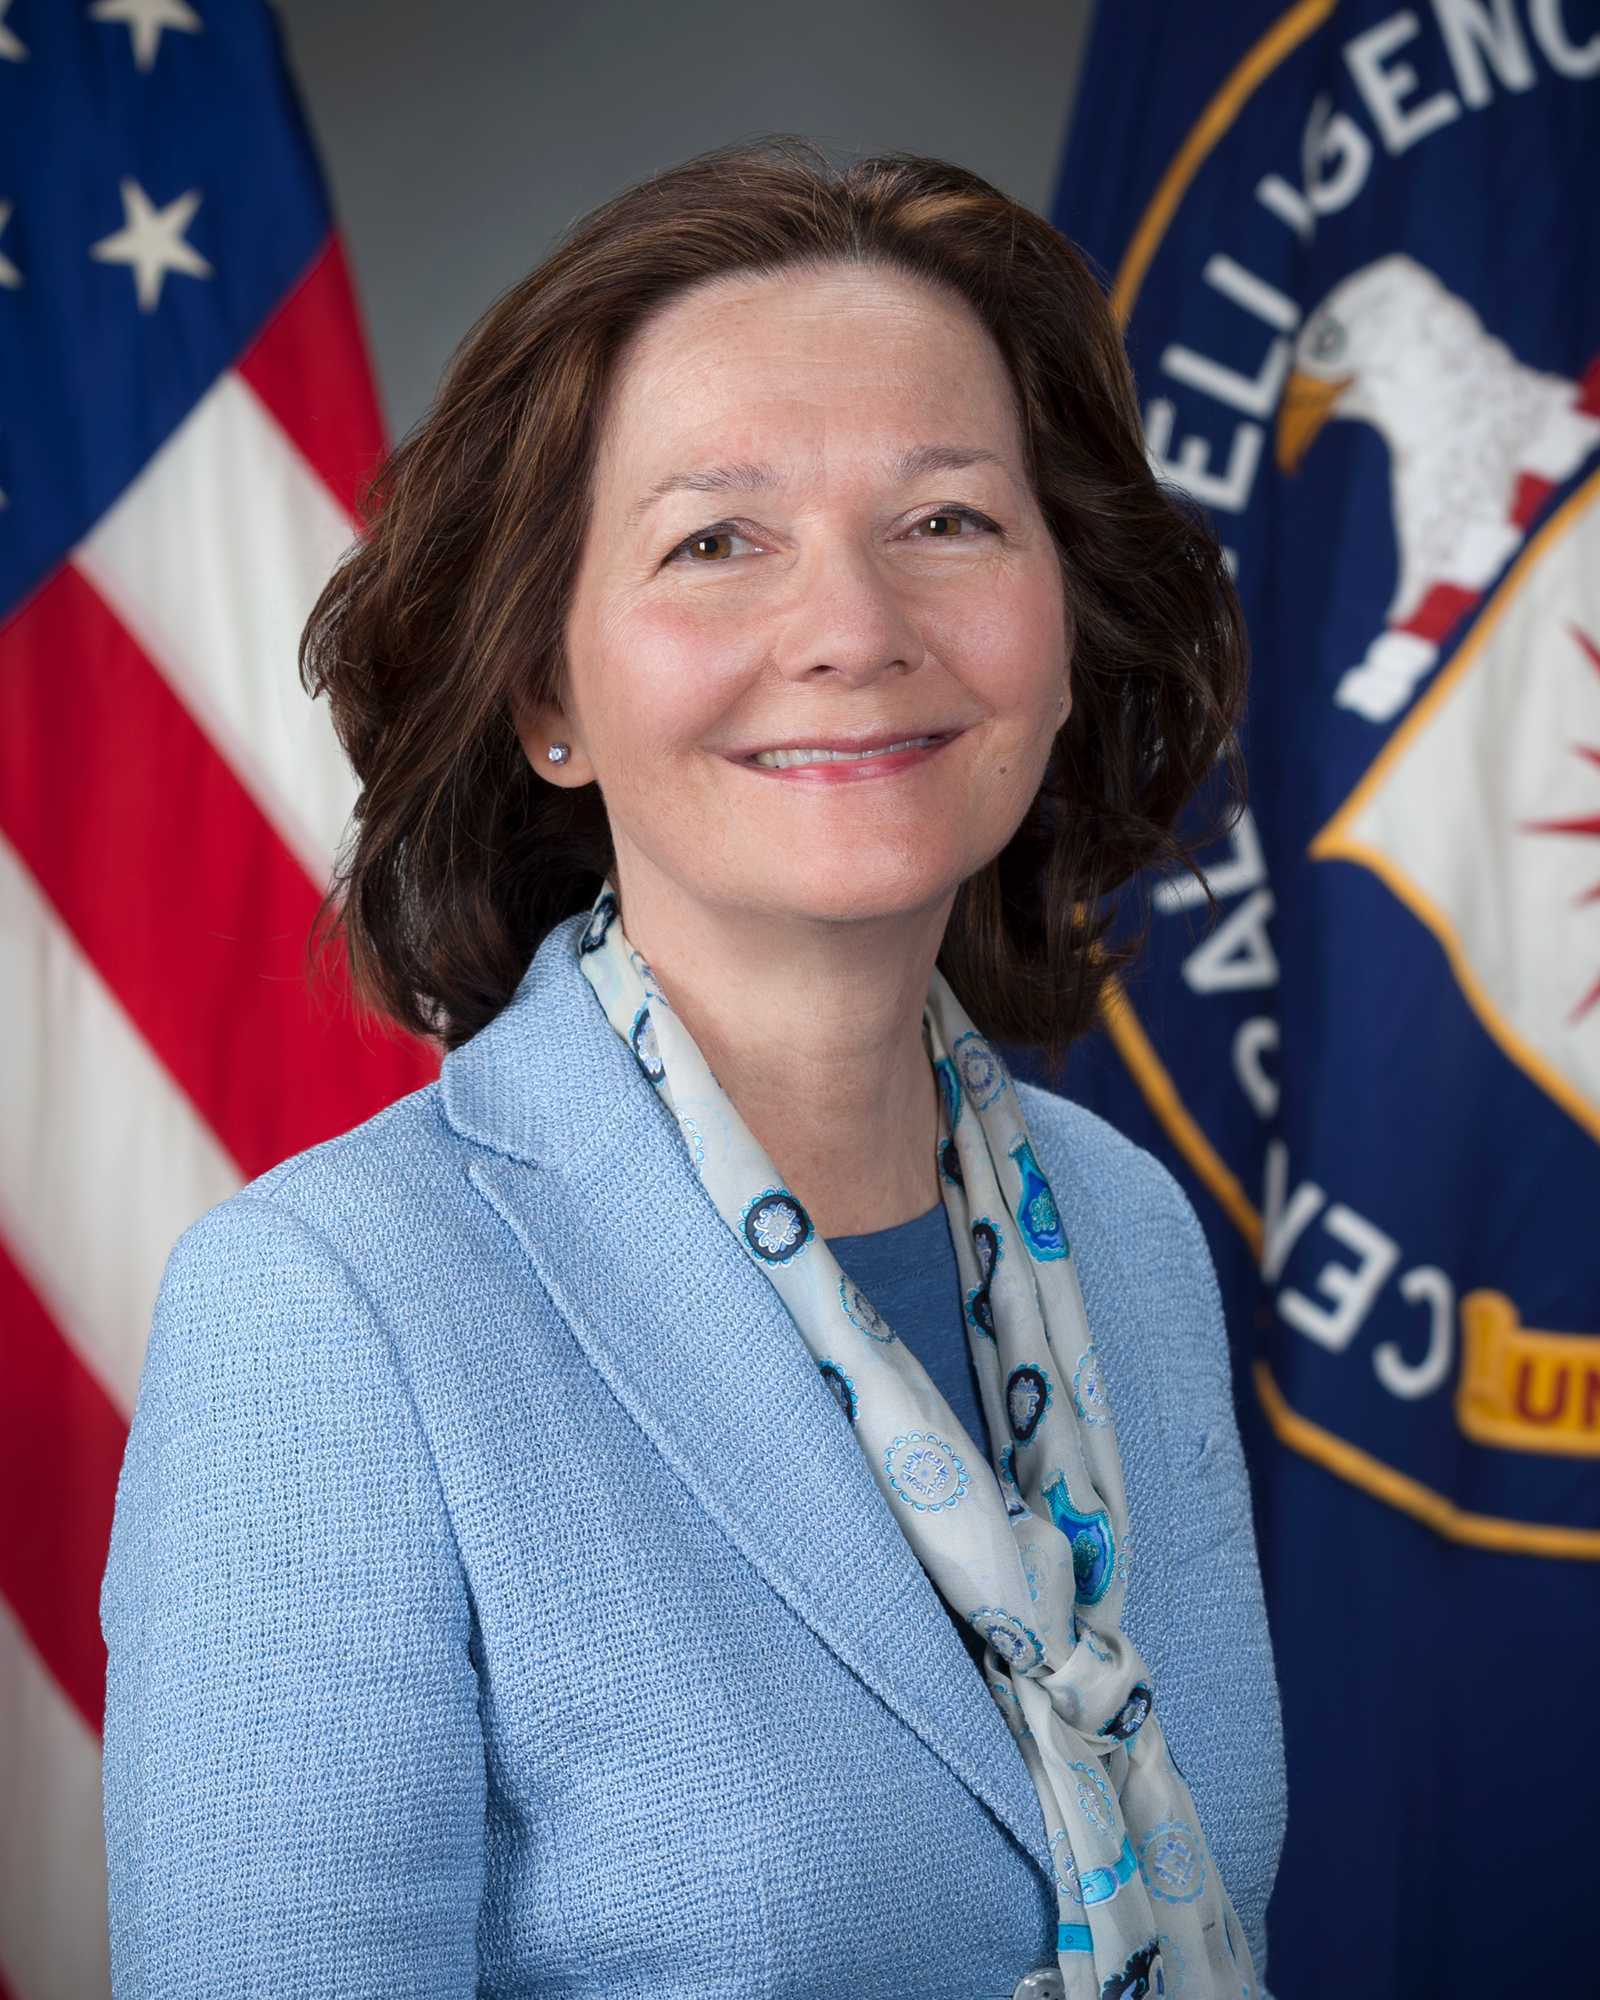 A headshot of Gina Haspel standing in front of the American flag and the CIA flag.